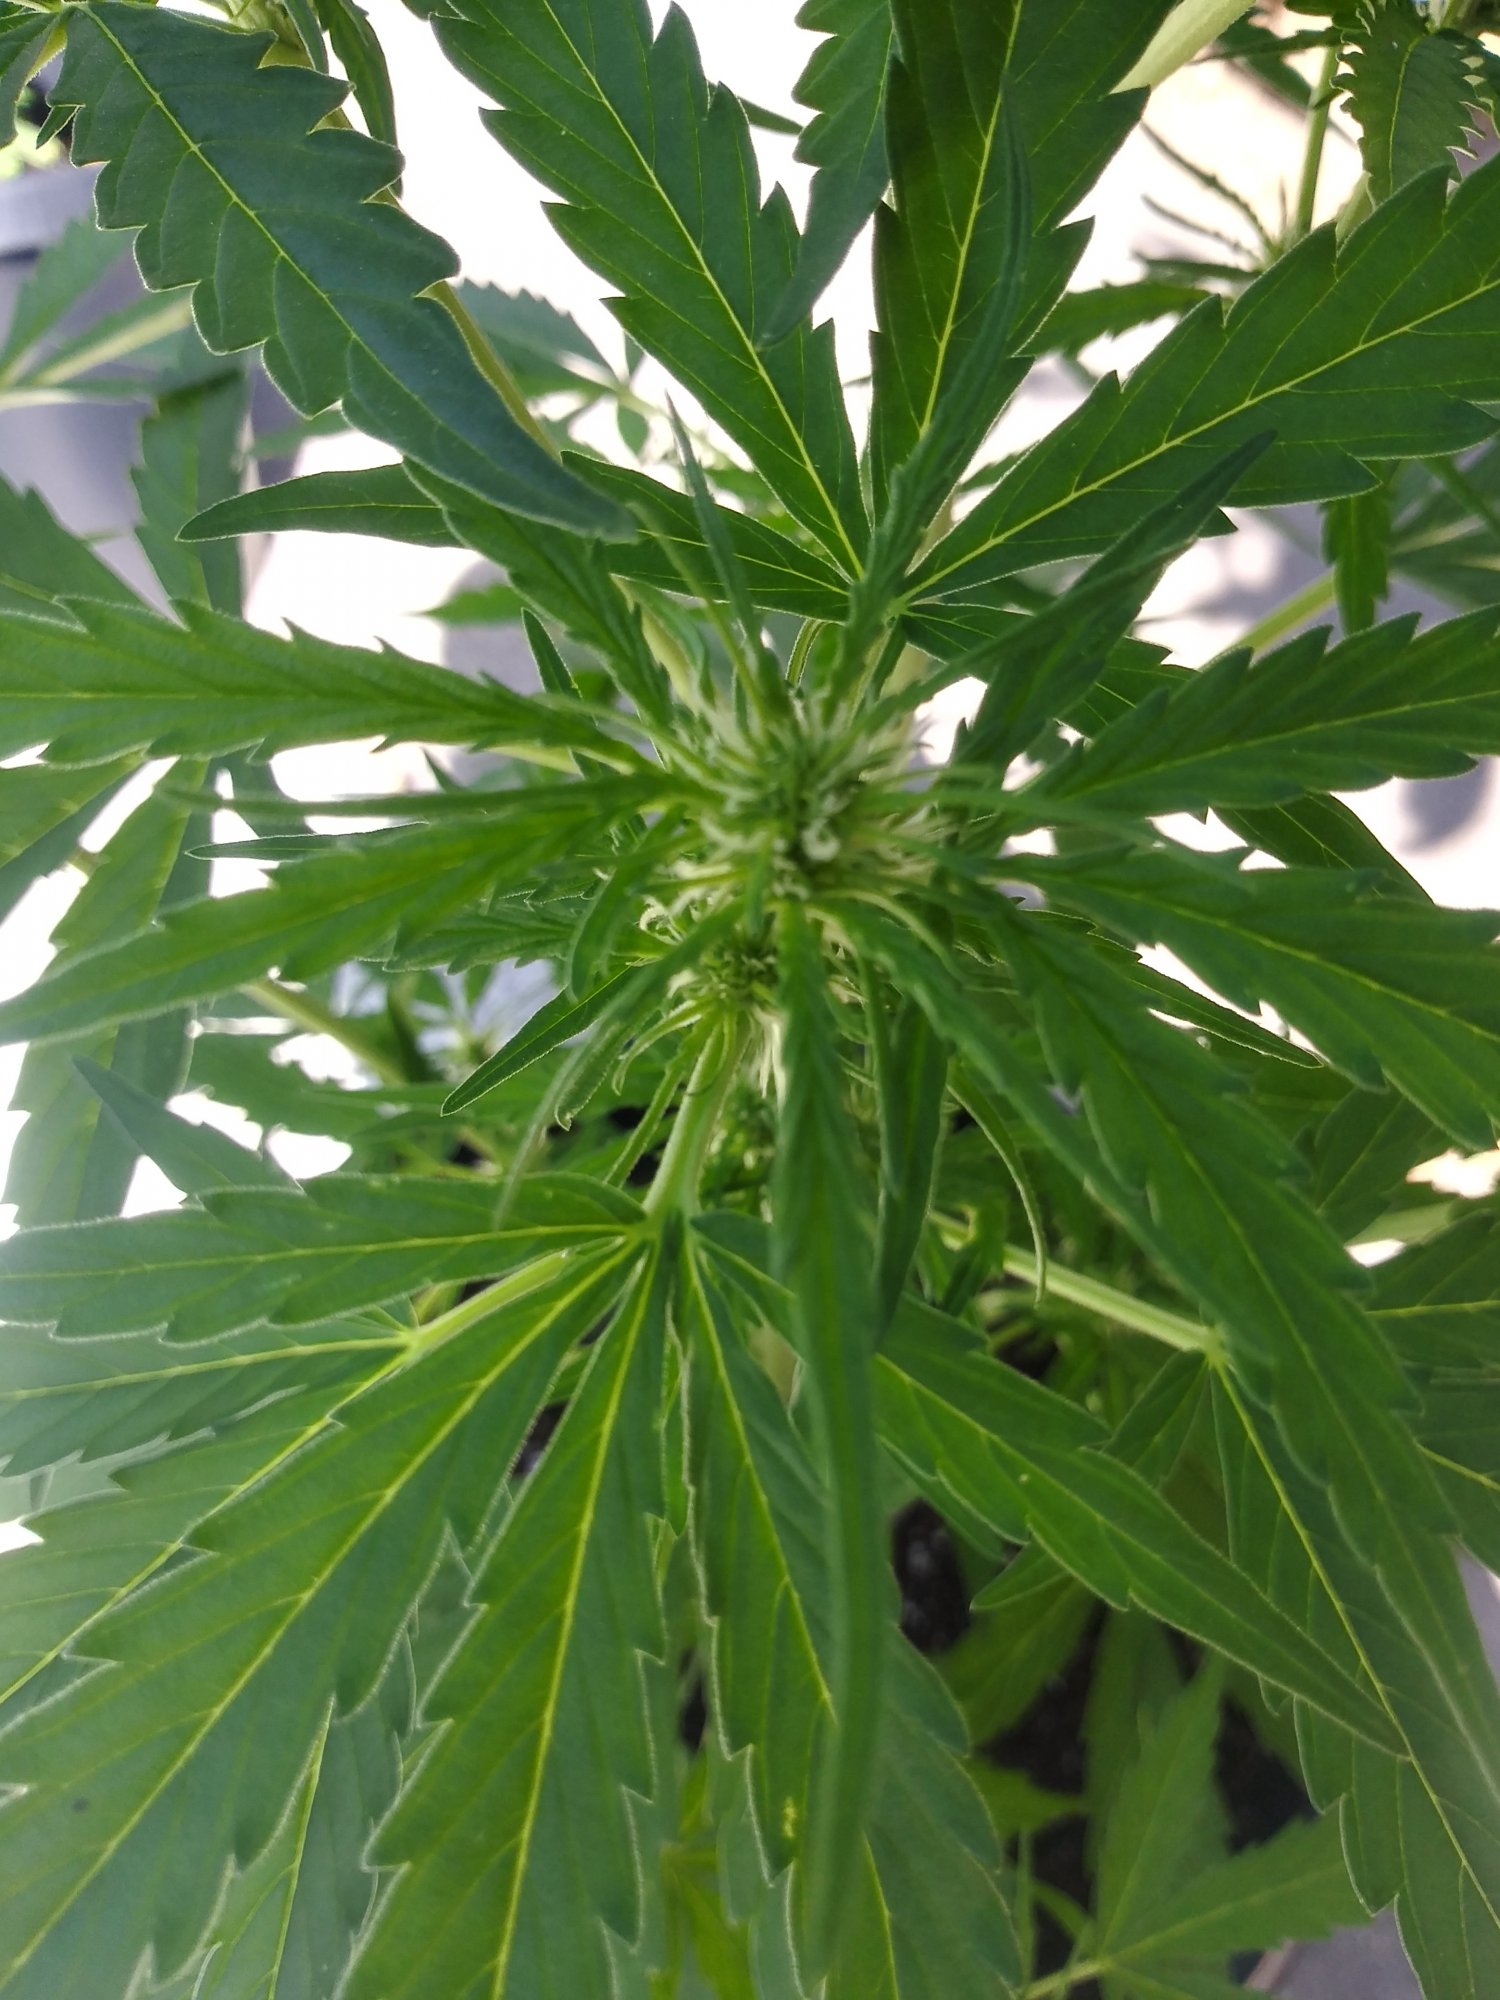 Bud boost yet first time grower question 4